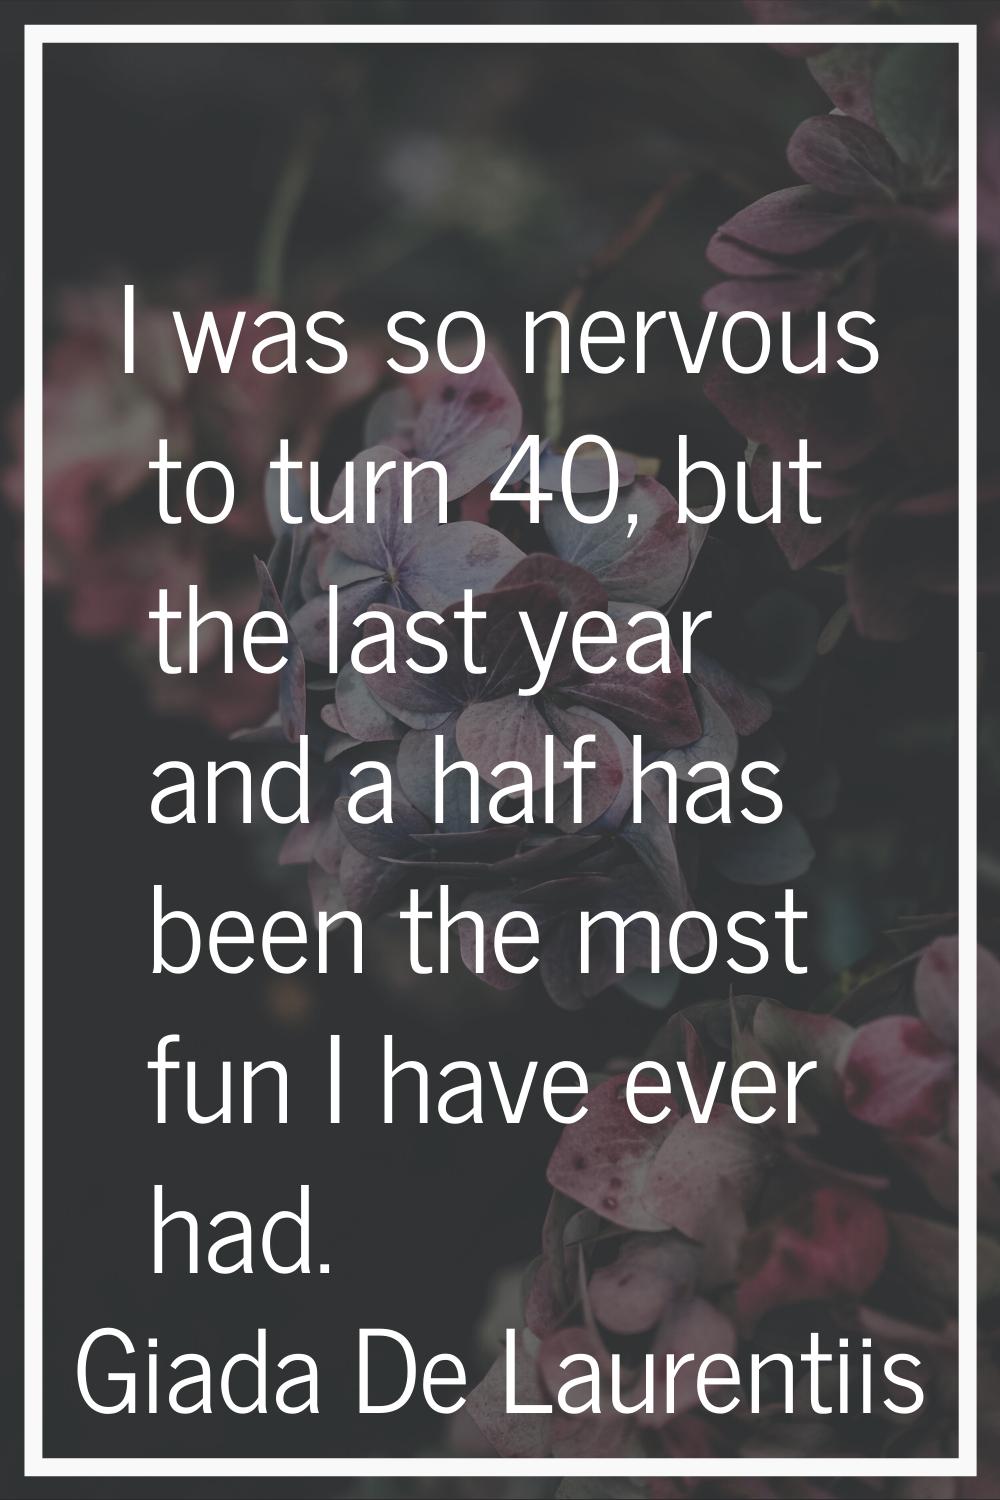 I was so nervous to turn 40, but the last year and a half has been the most fun I have ever had.